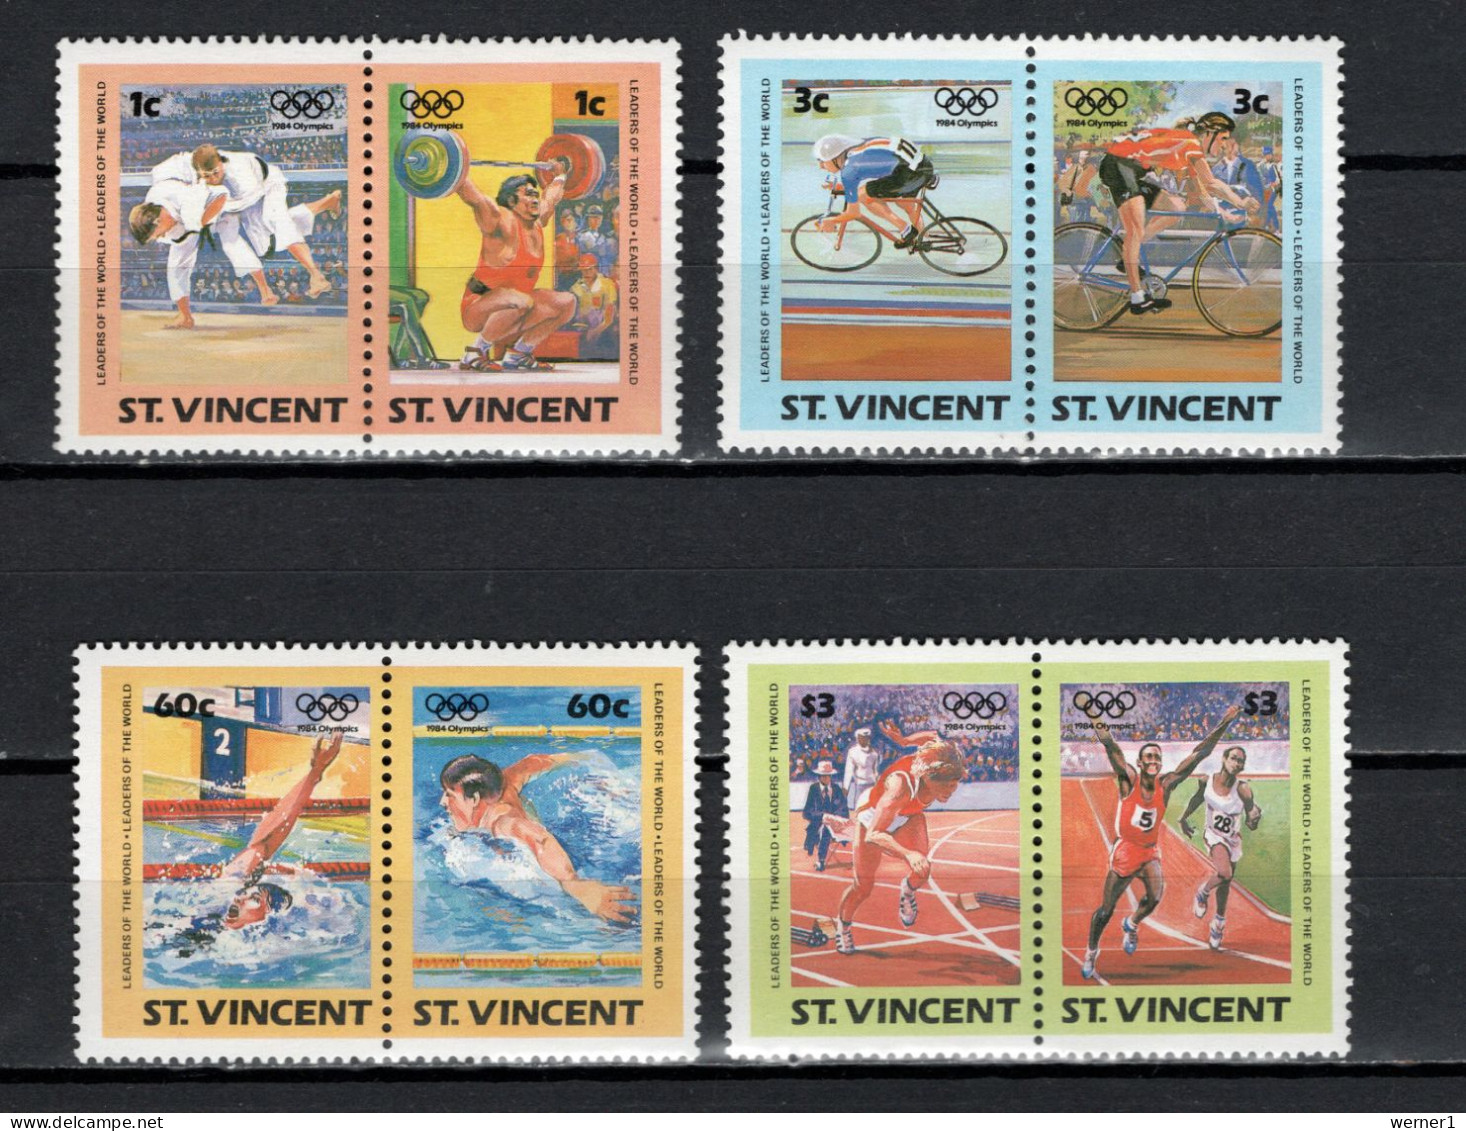 St. Vincent 1984 Olympic Games Los Angeles, Judo, Weightlifting, Cycling, Swimming, Athletics Set Of 8 MNH - Verano 1984: Los Angeles